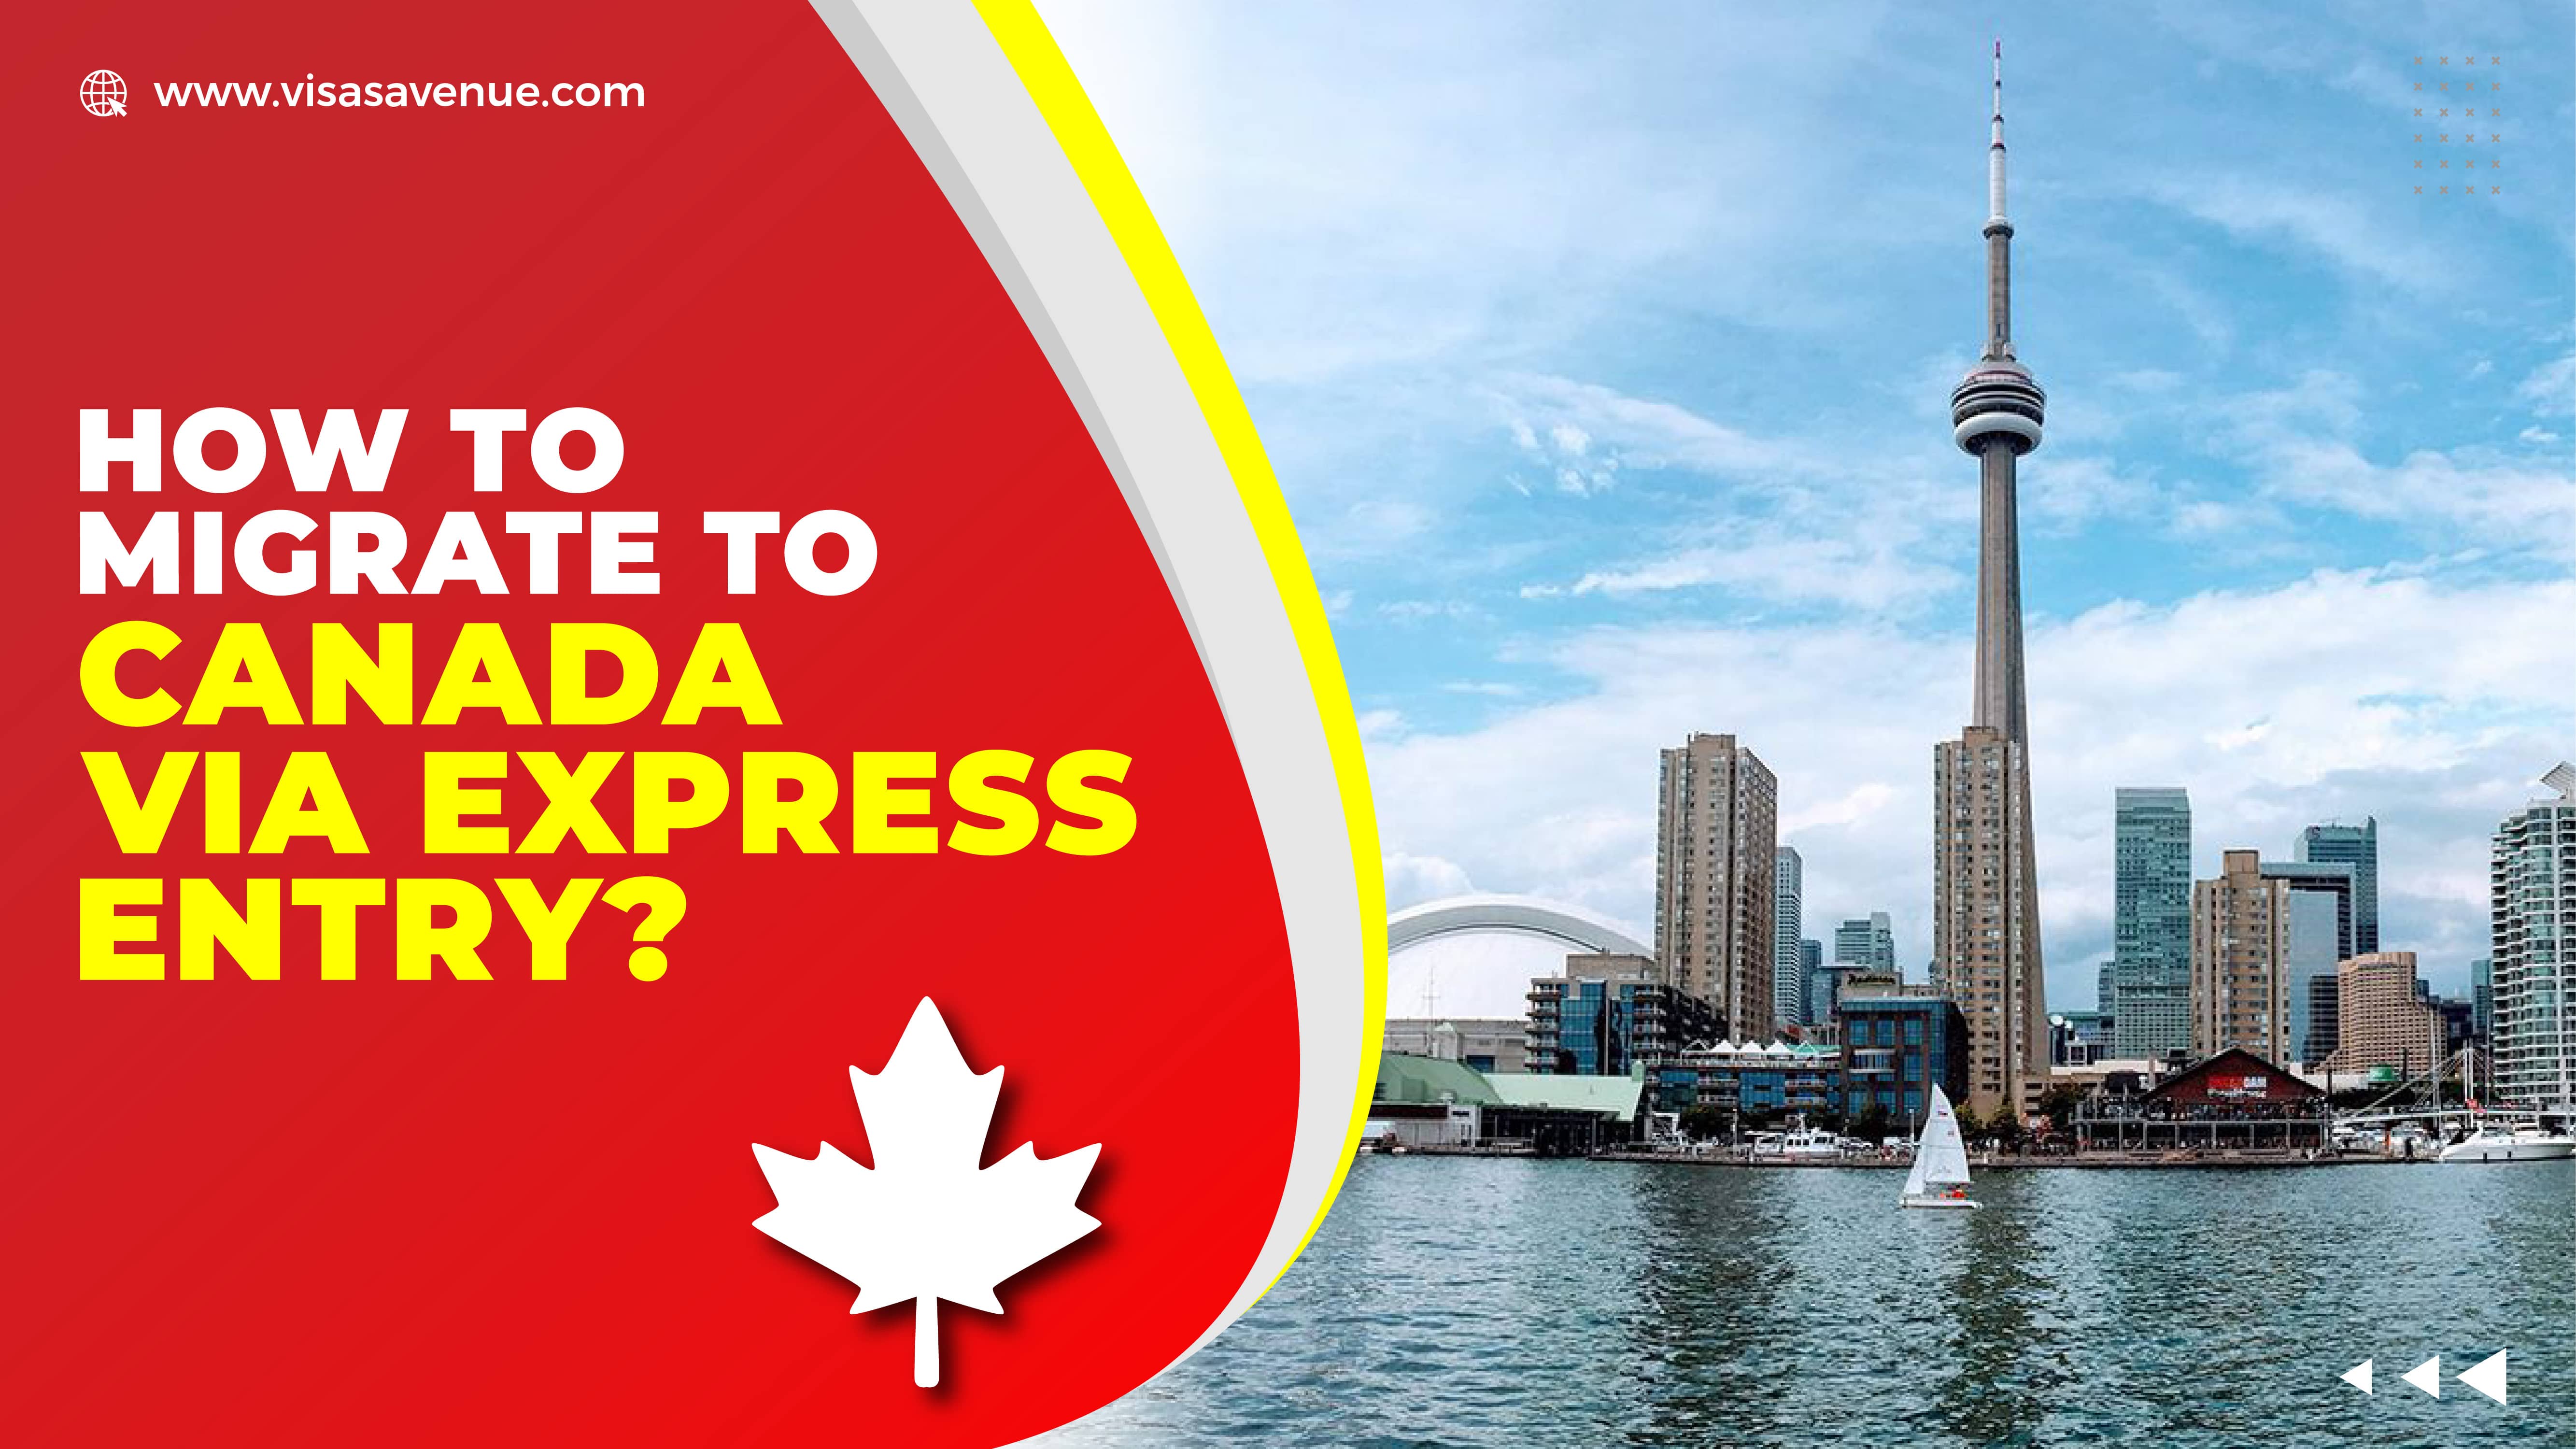 How to migrate to Canada via Express Entry?